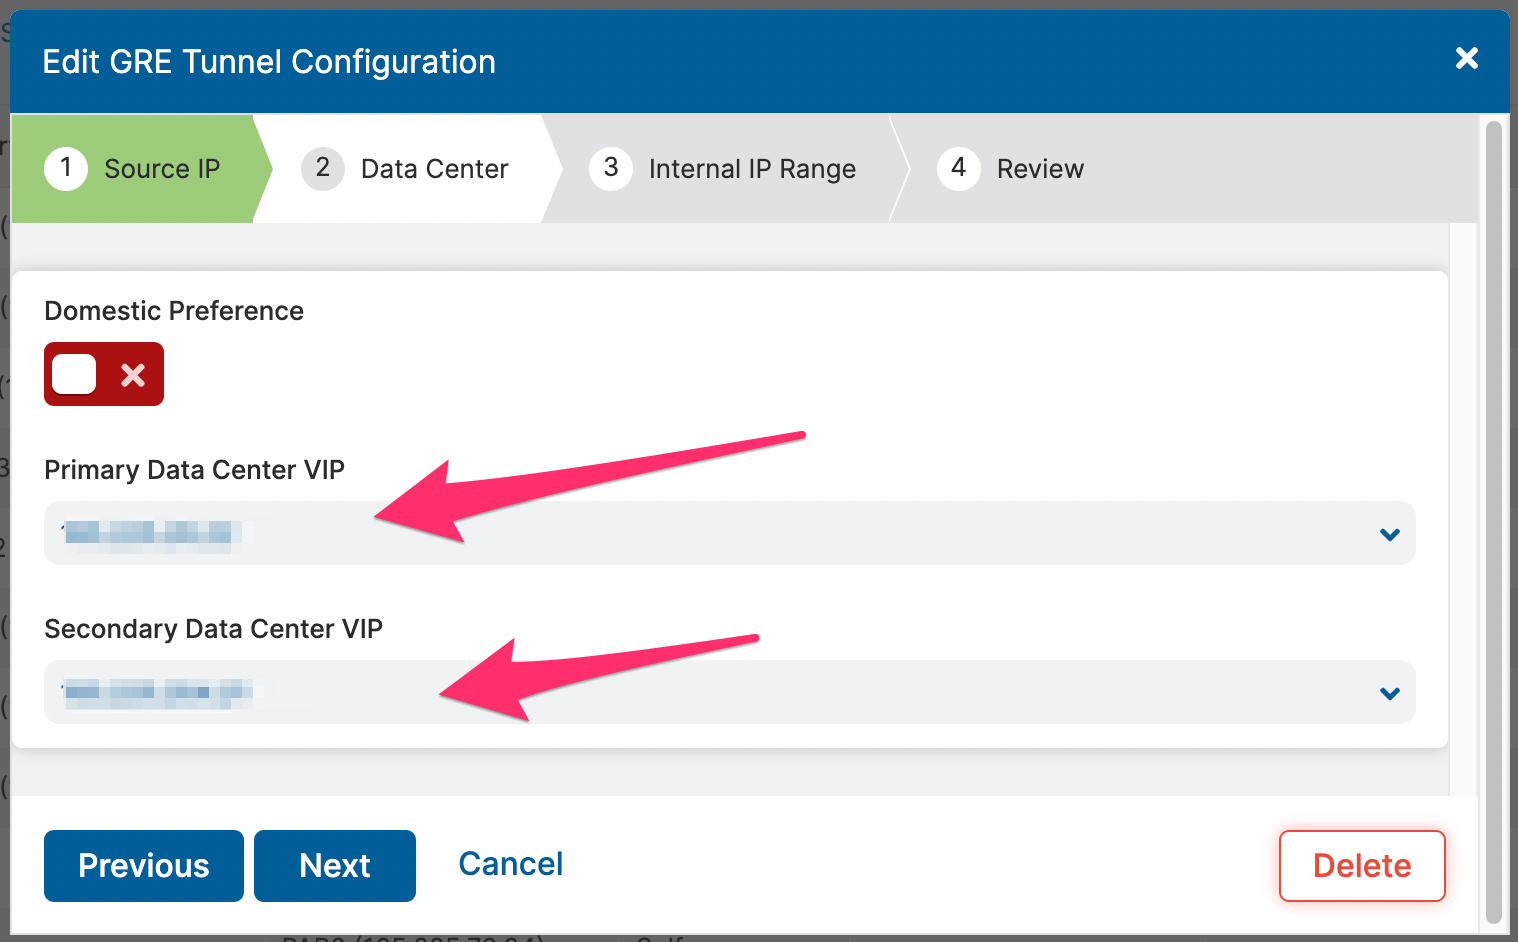 Zscaler - Edit GRE tunnel configuration: Select the destination IPs